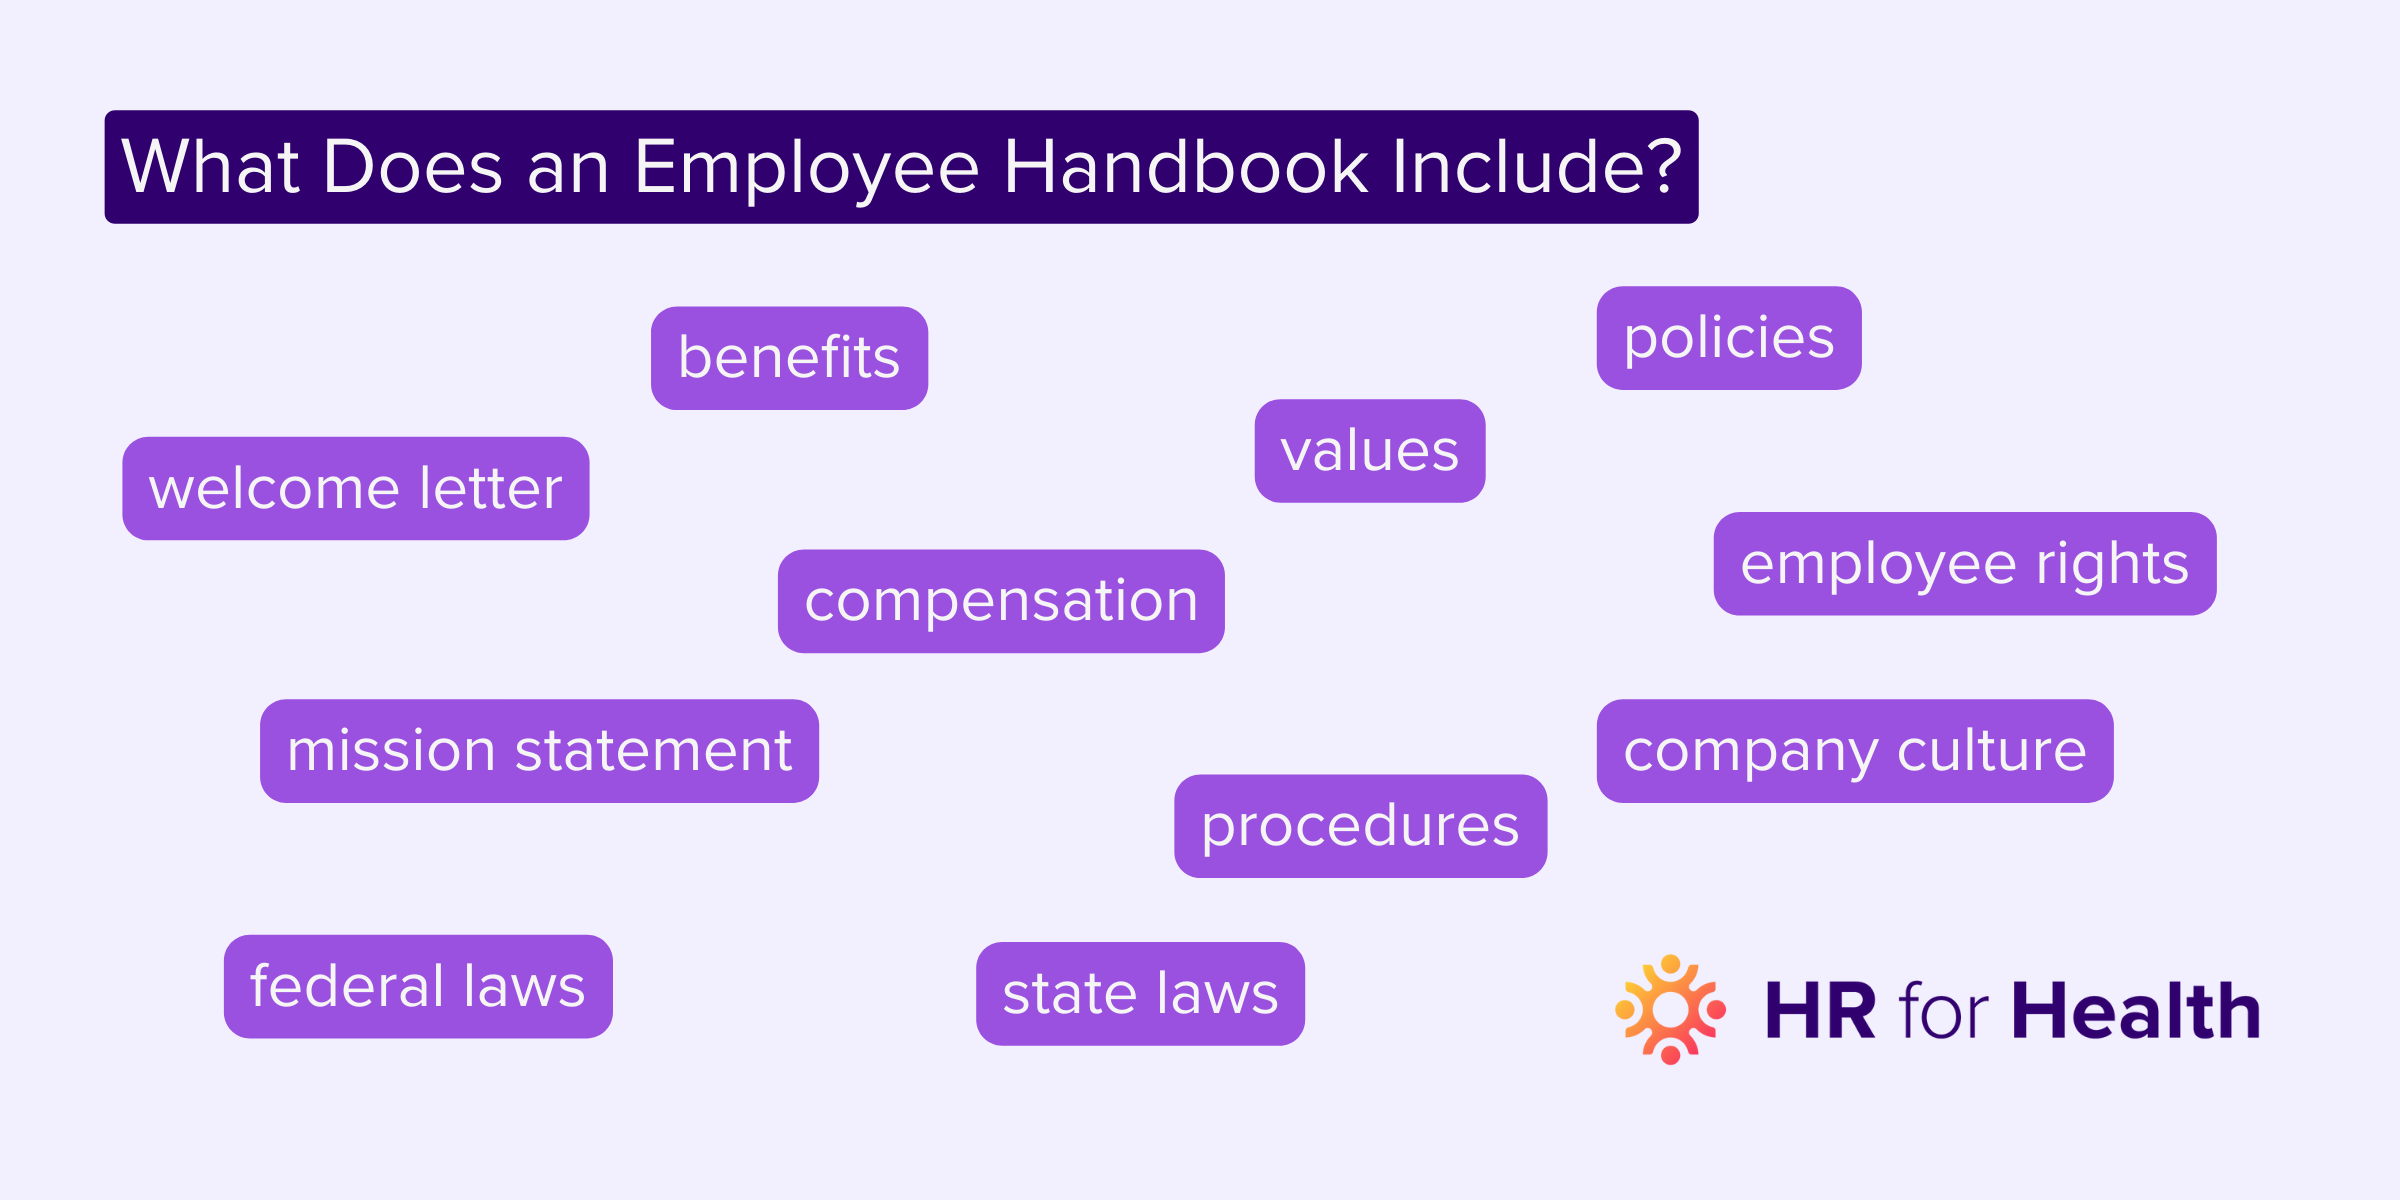 What Does an Employee Handbook Include